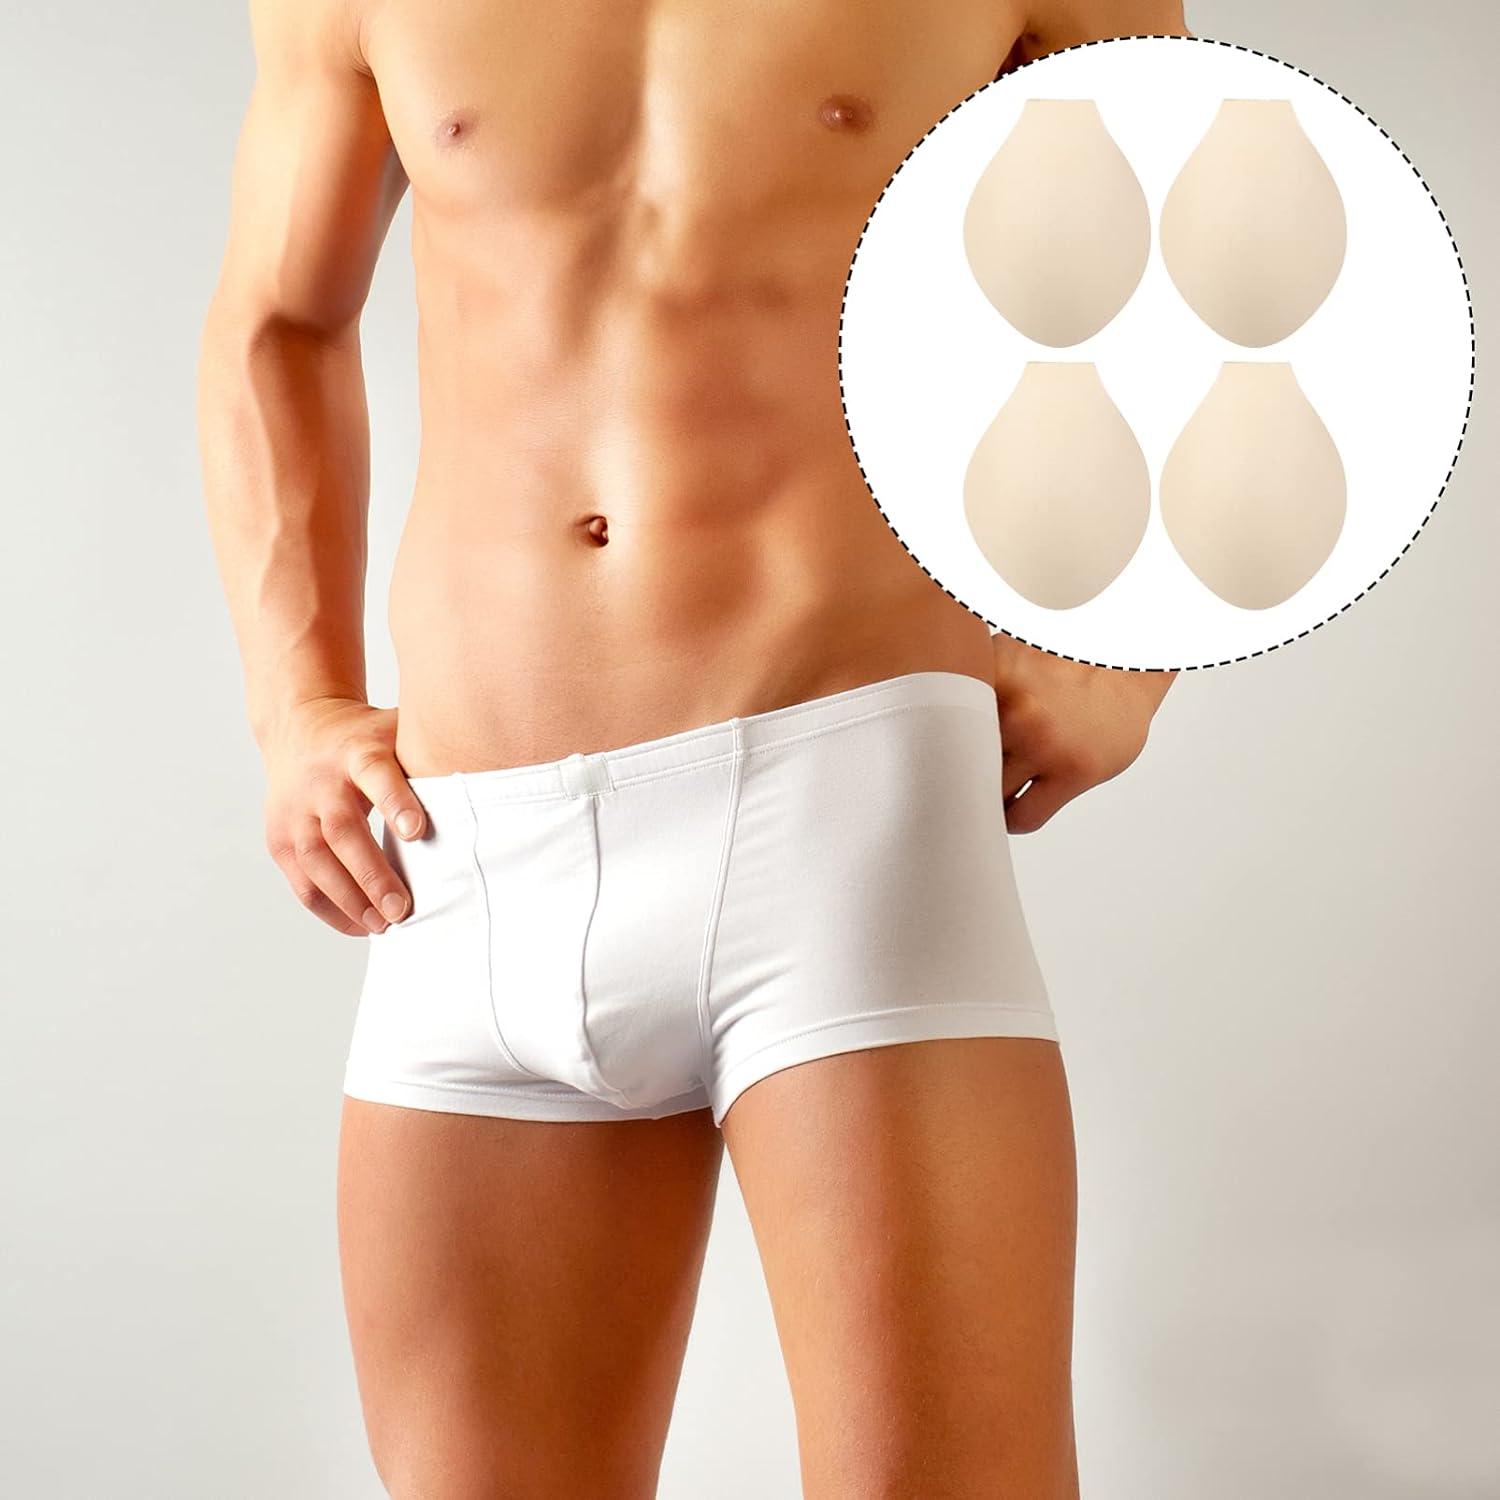 Men Bulge Enhancing Underwear Cup Removable The Male Package